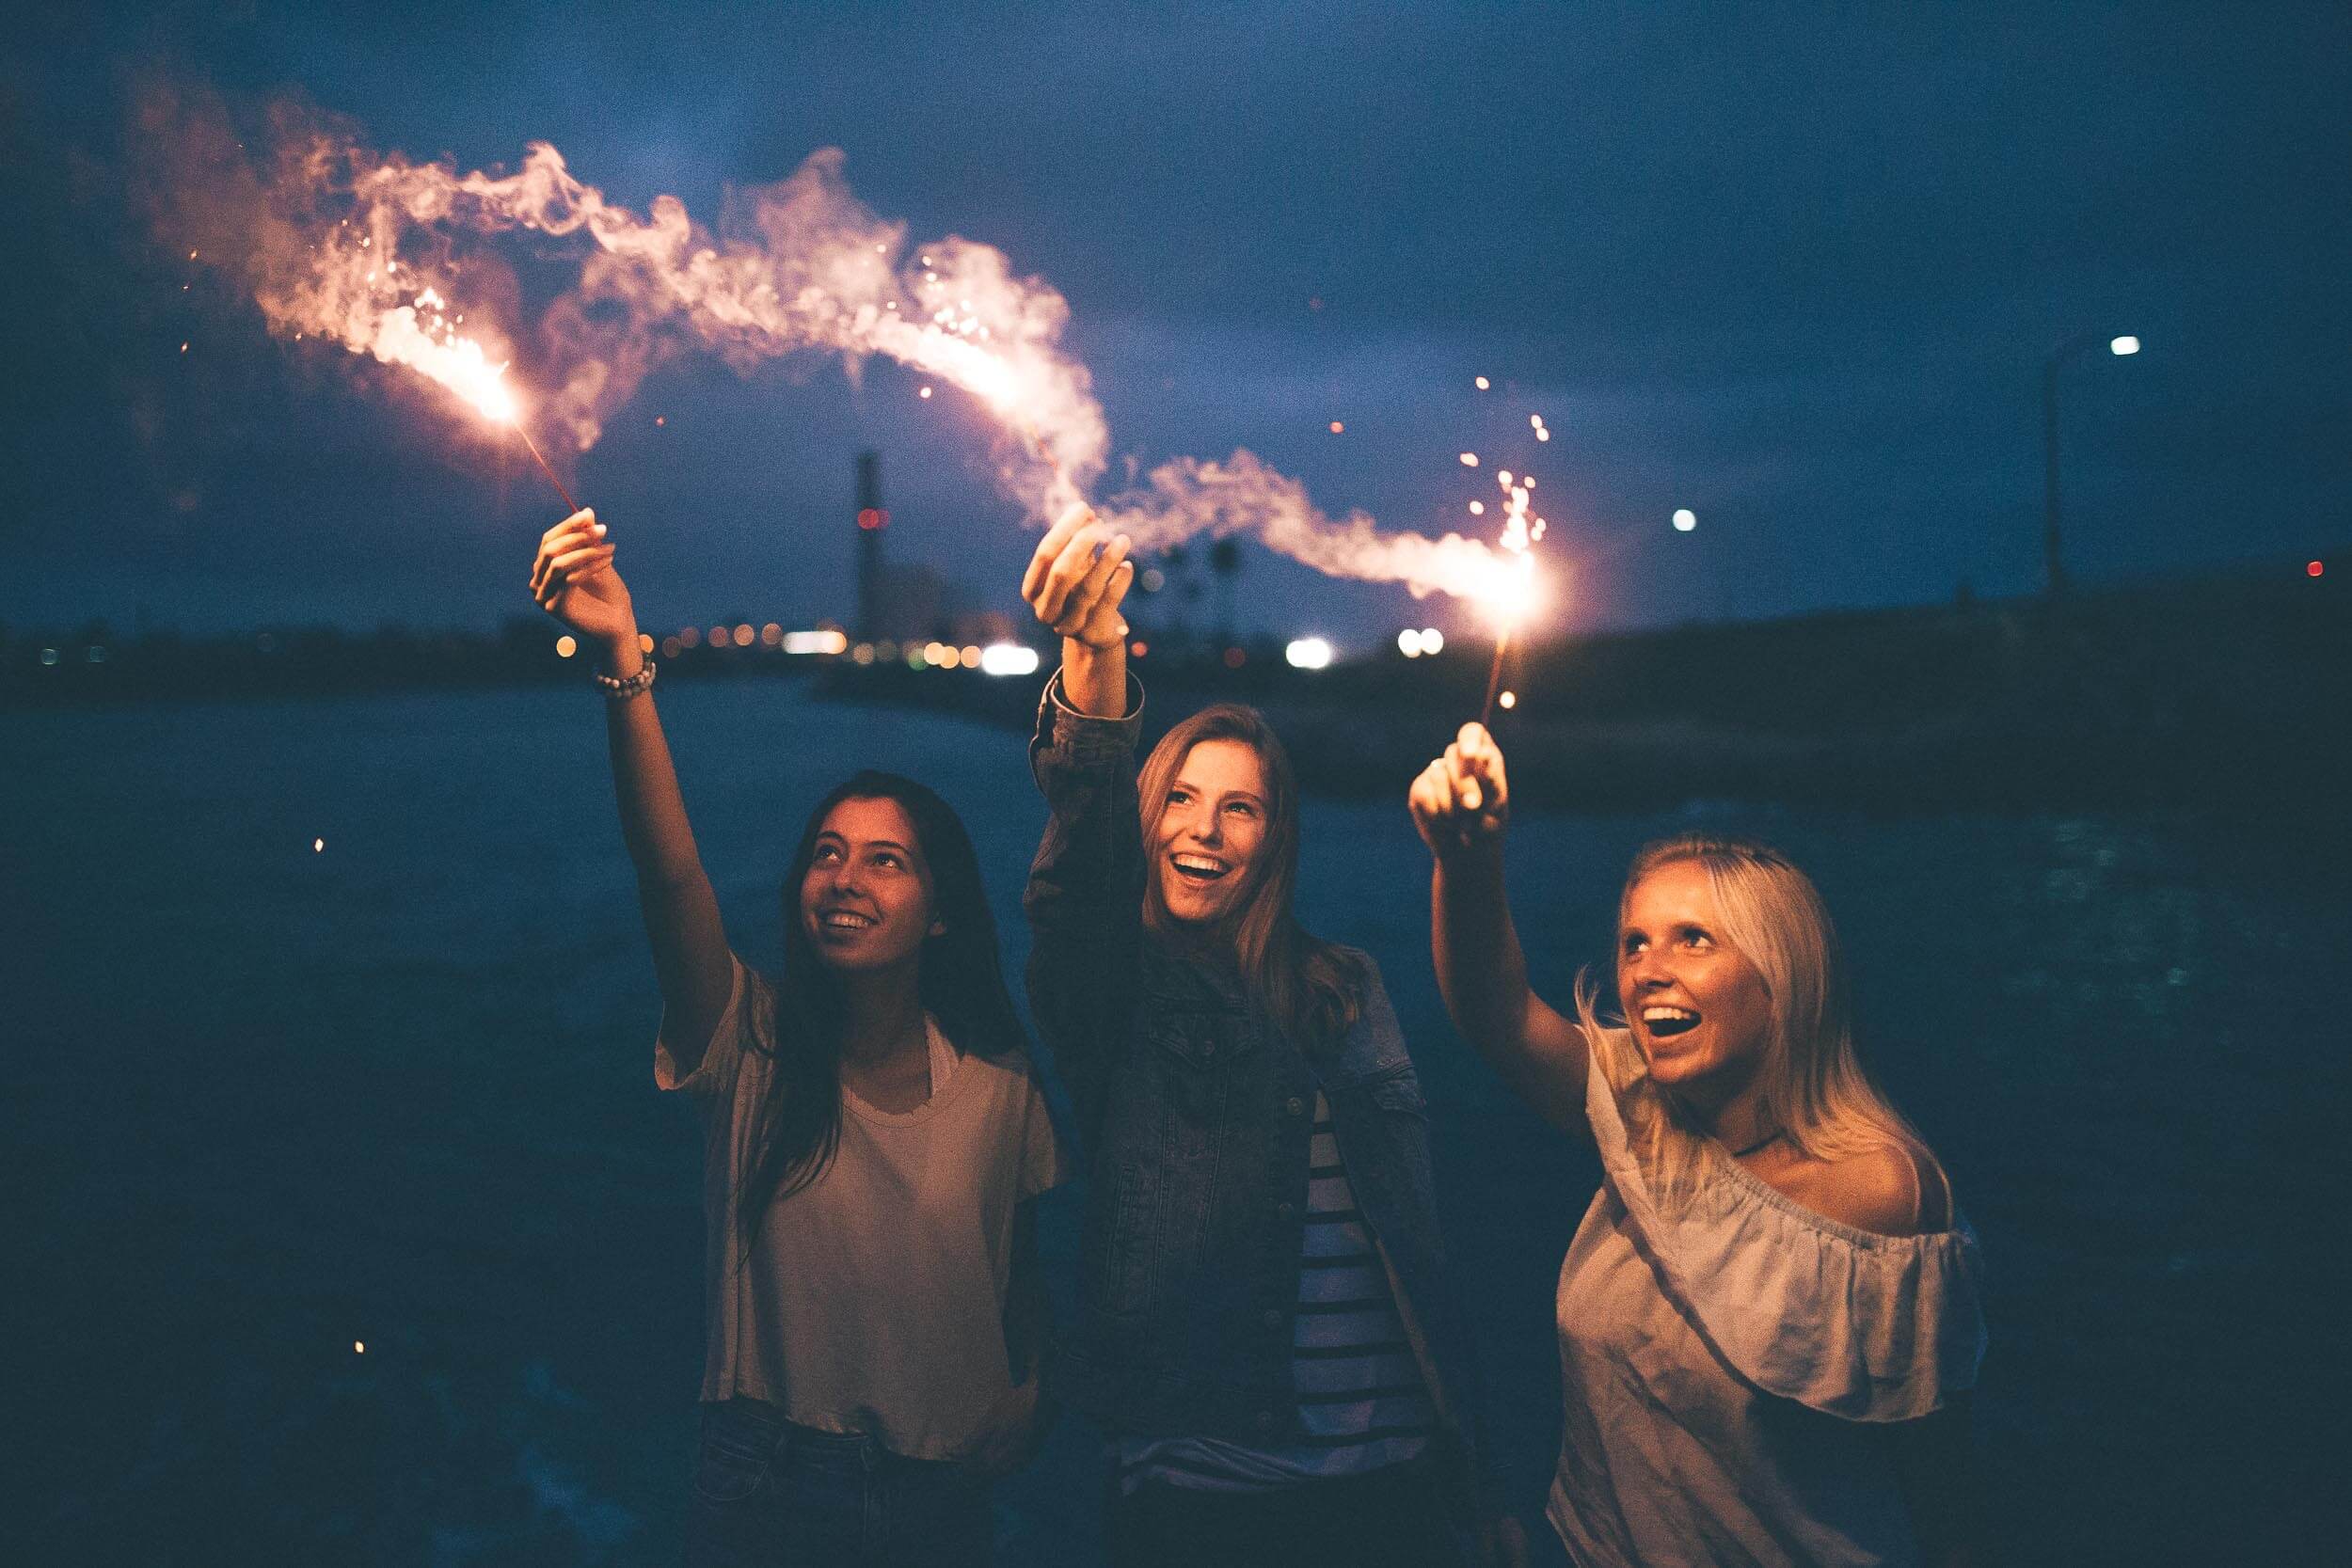 5 Ways Your Words Can Empower Your Friend